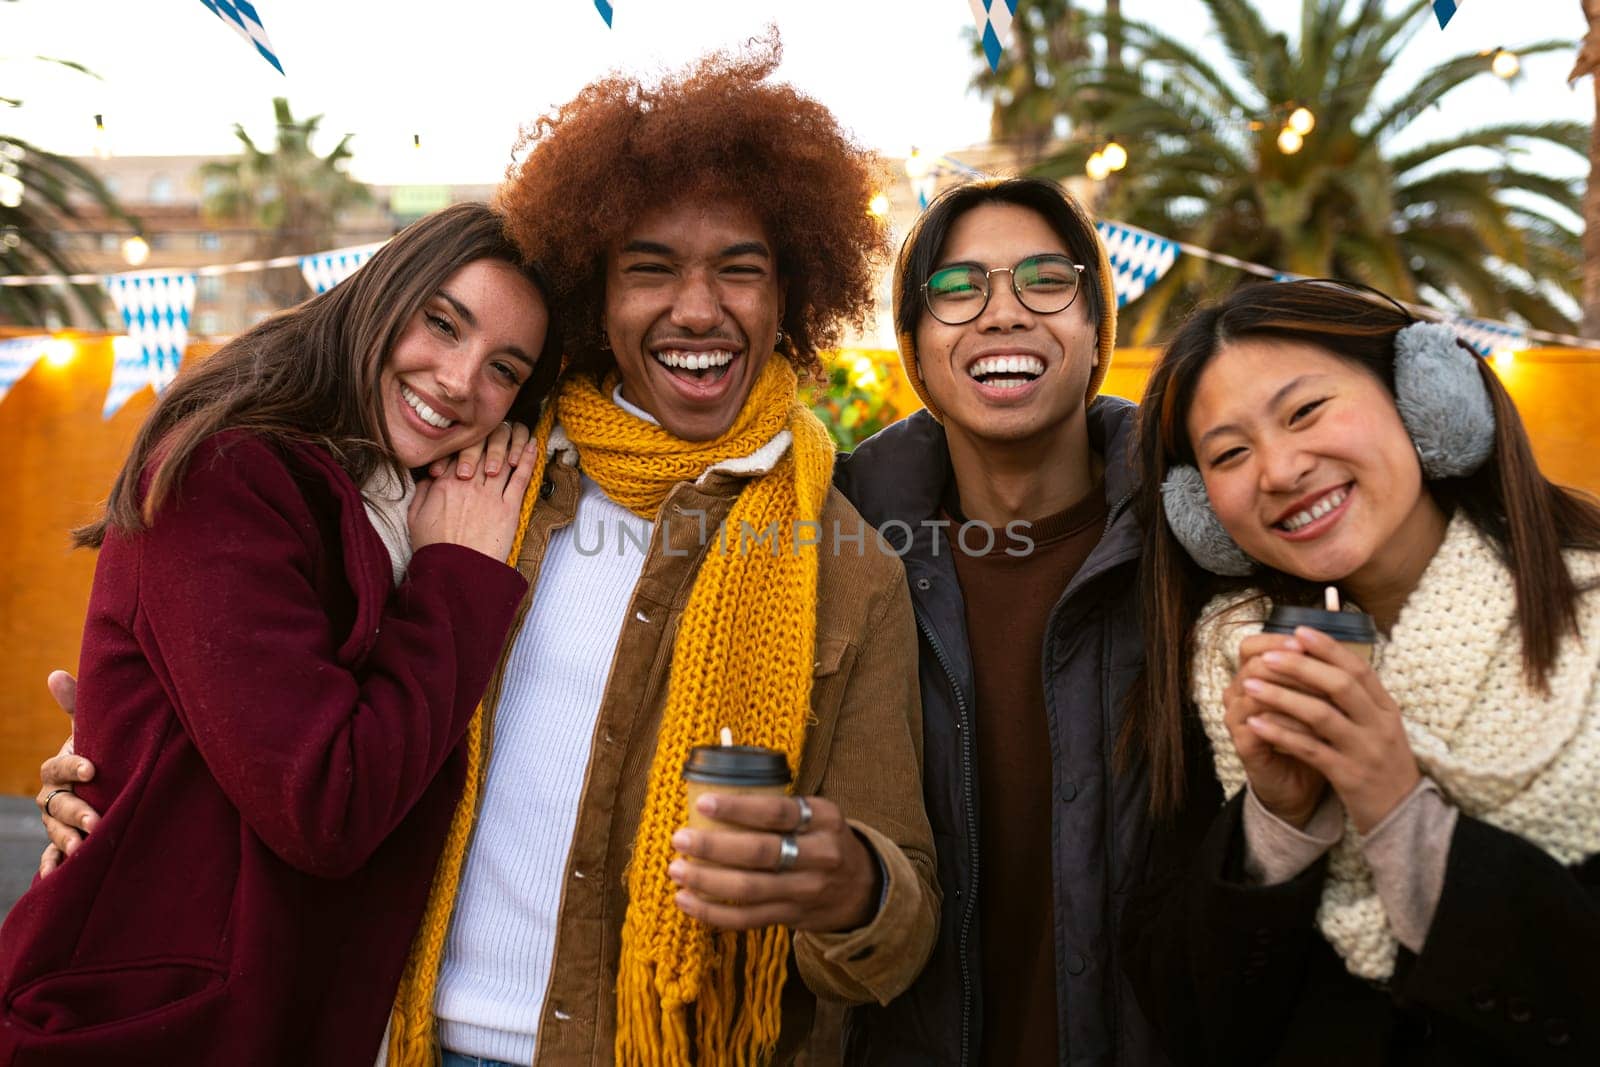 Happy and cheerful multiracial group of college student friends looking at camera smiling on a sunny winter day outdoors.Lifestyle portrait concept.